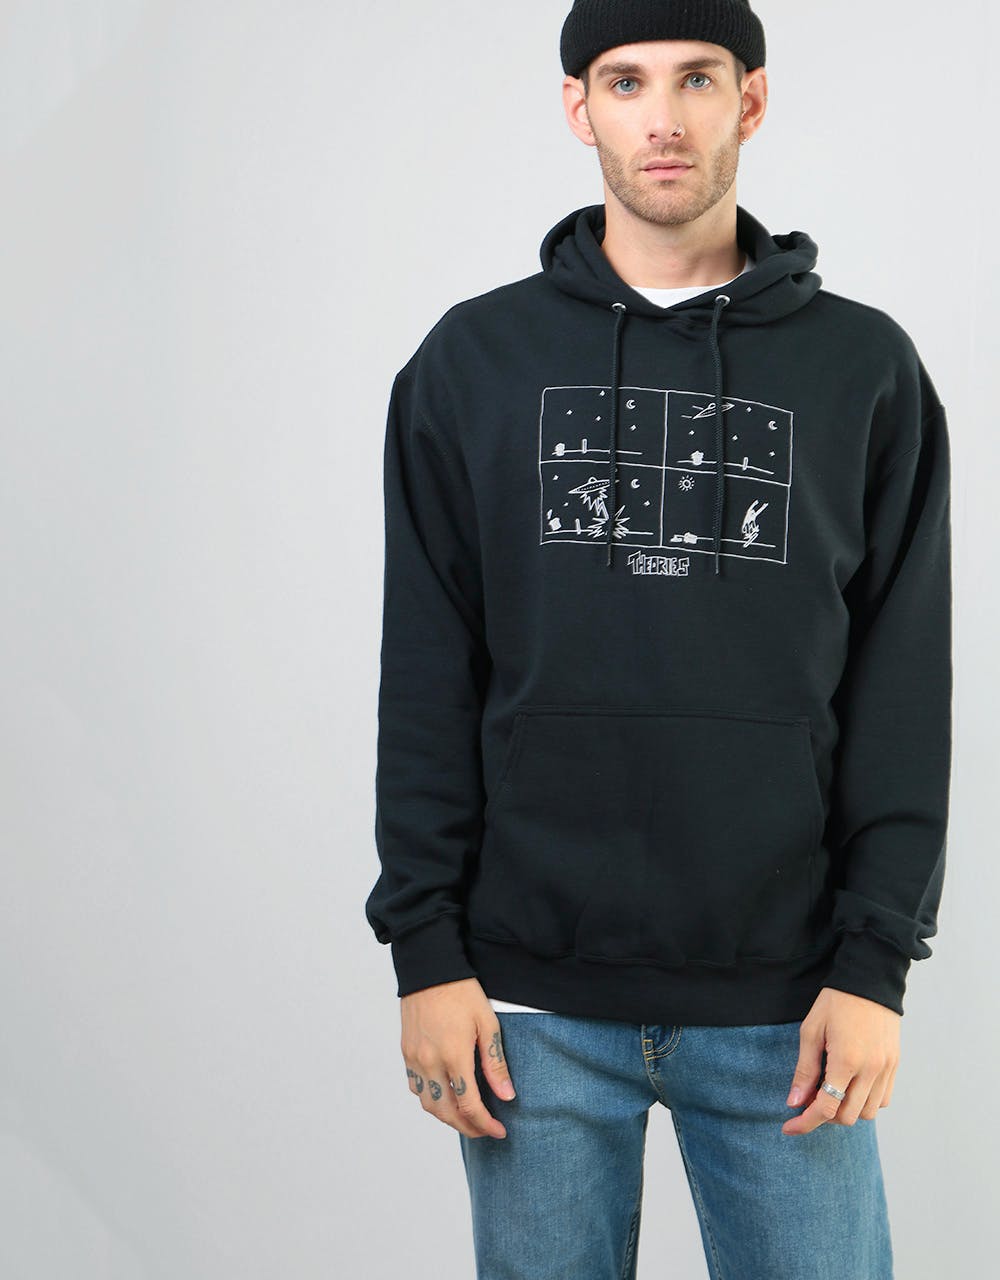 Theories How They Got Here Pullover Hoodie - Black